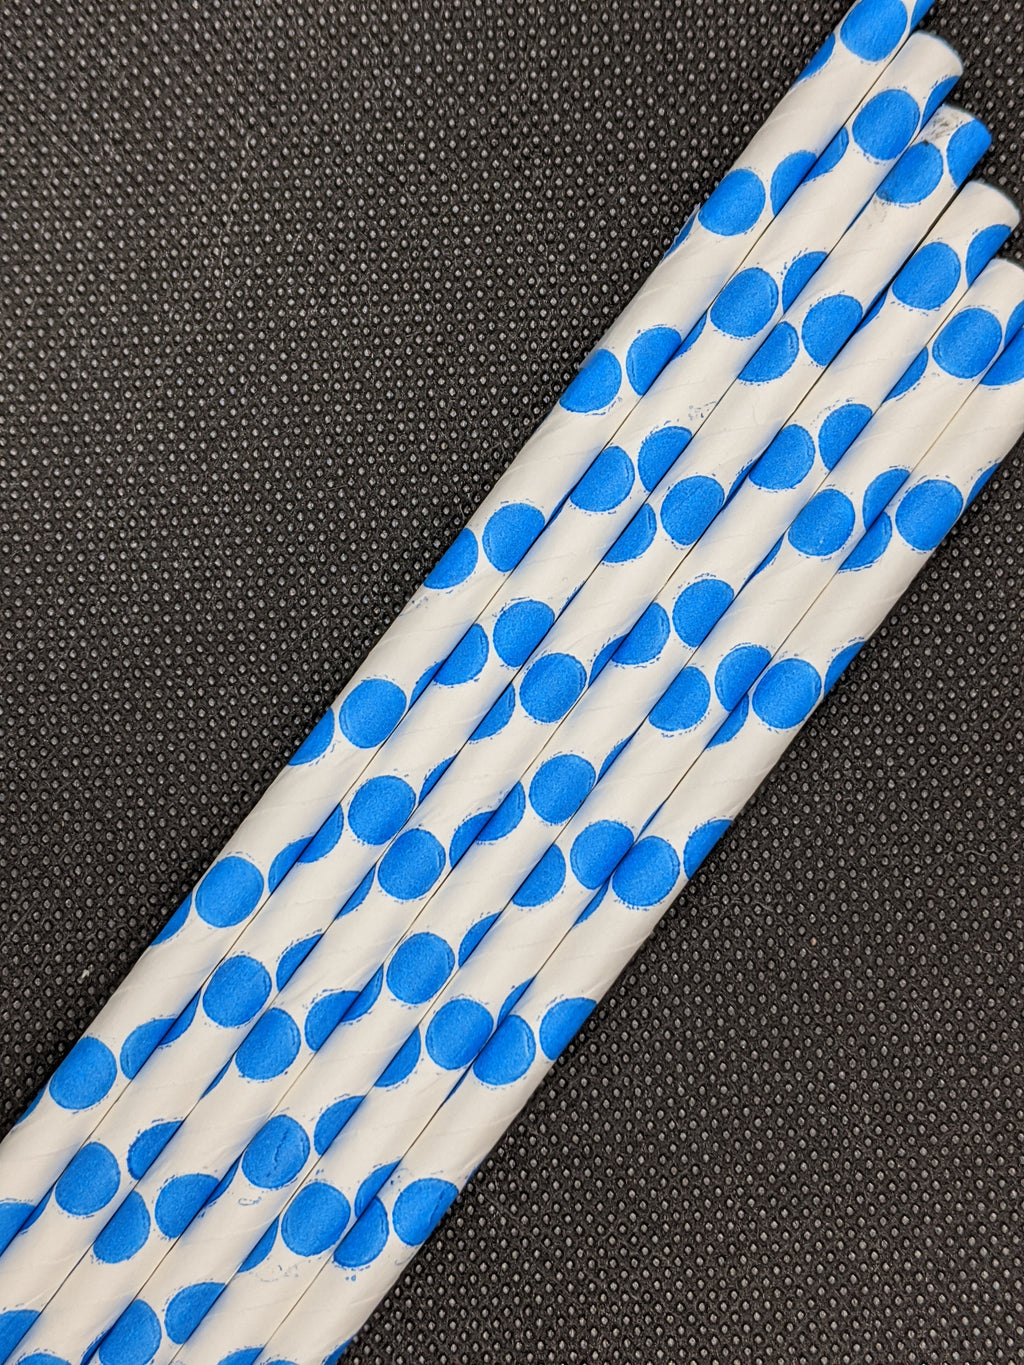 7.75" PAPER STRAWS - BLUE DOT DESIGN - 2400 CT (WRAPPED)